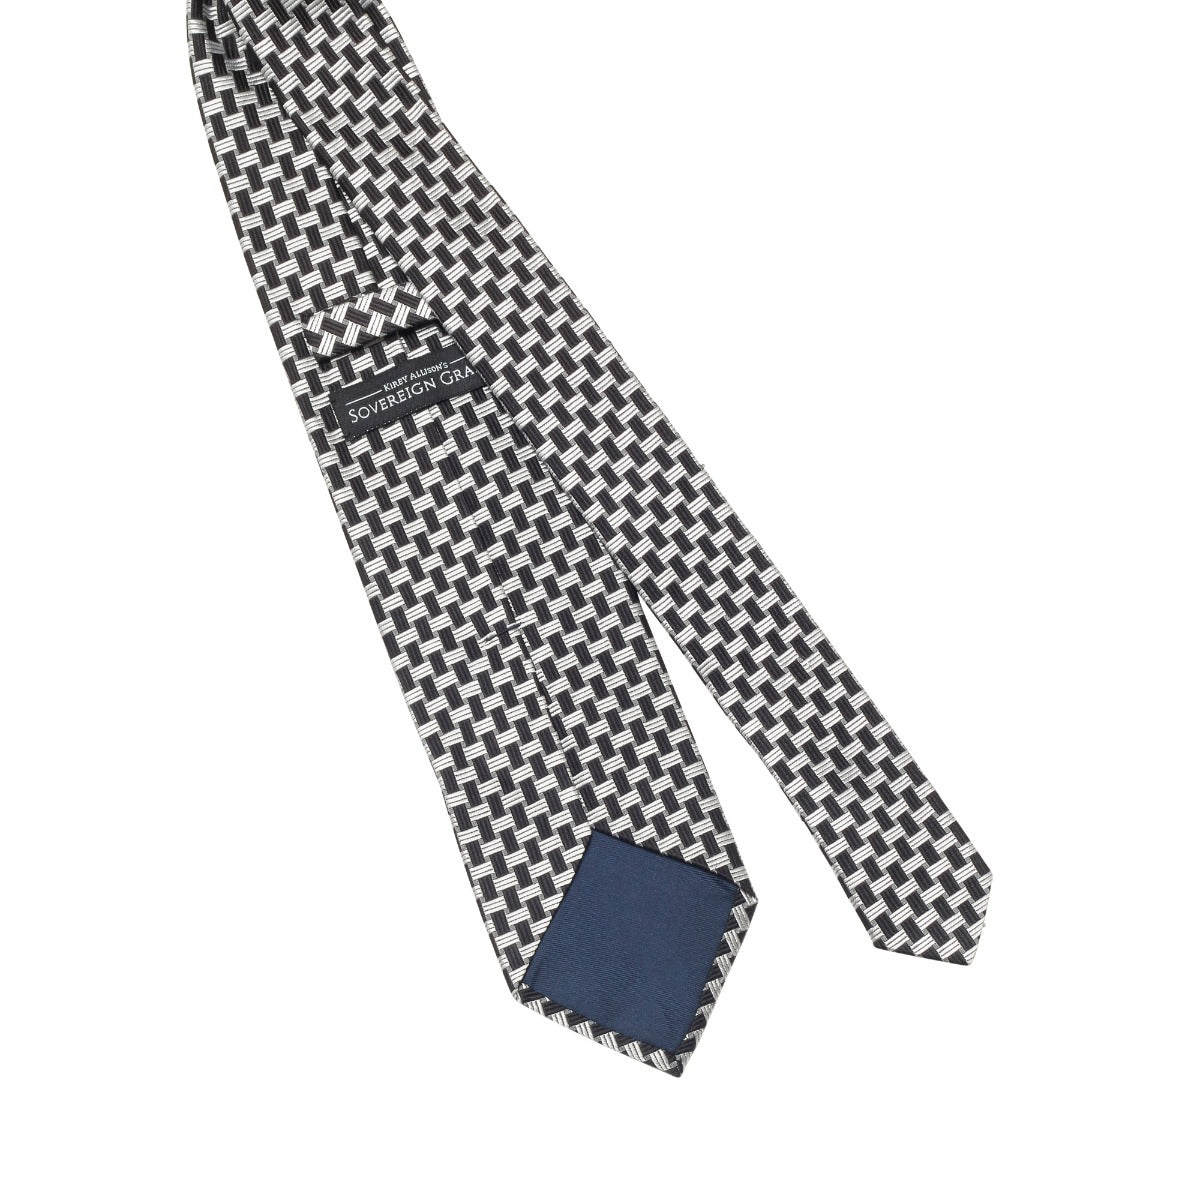 A handmade black and white checkered KirbyAllison.com Sovereign Grade Basket Weave Silk Tie, showcasing high-quality craftsmanship, on a white background.